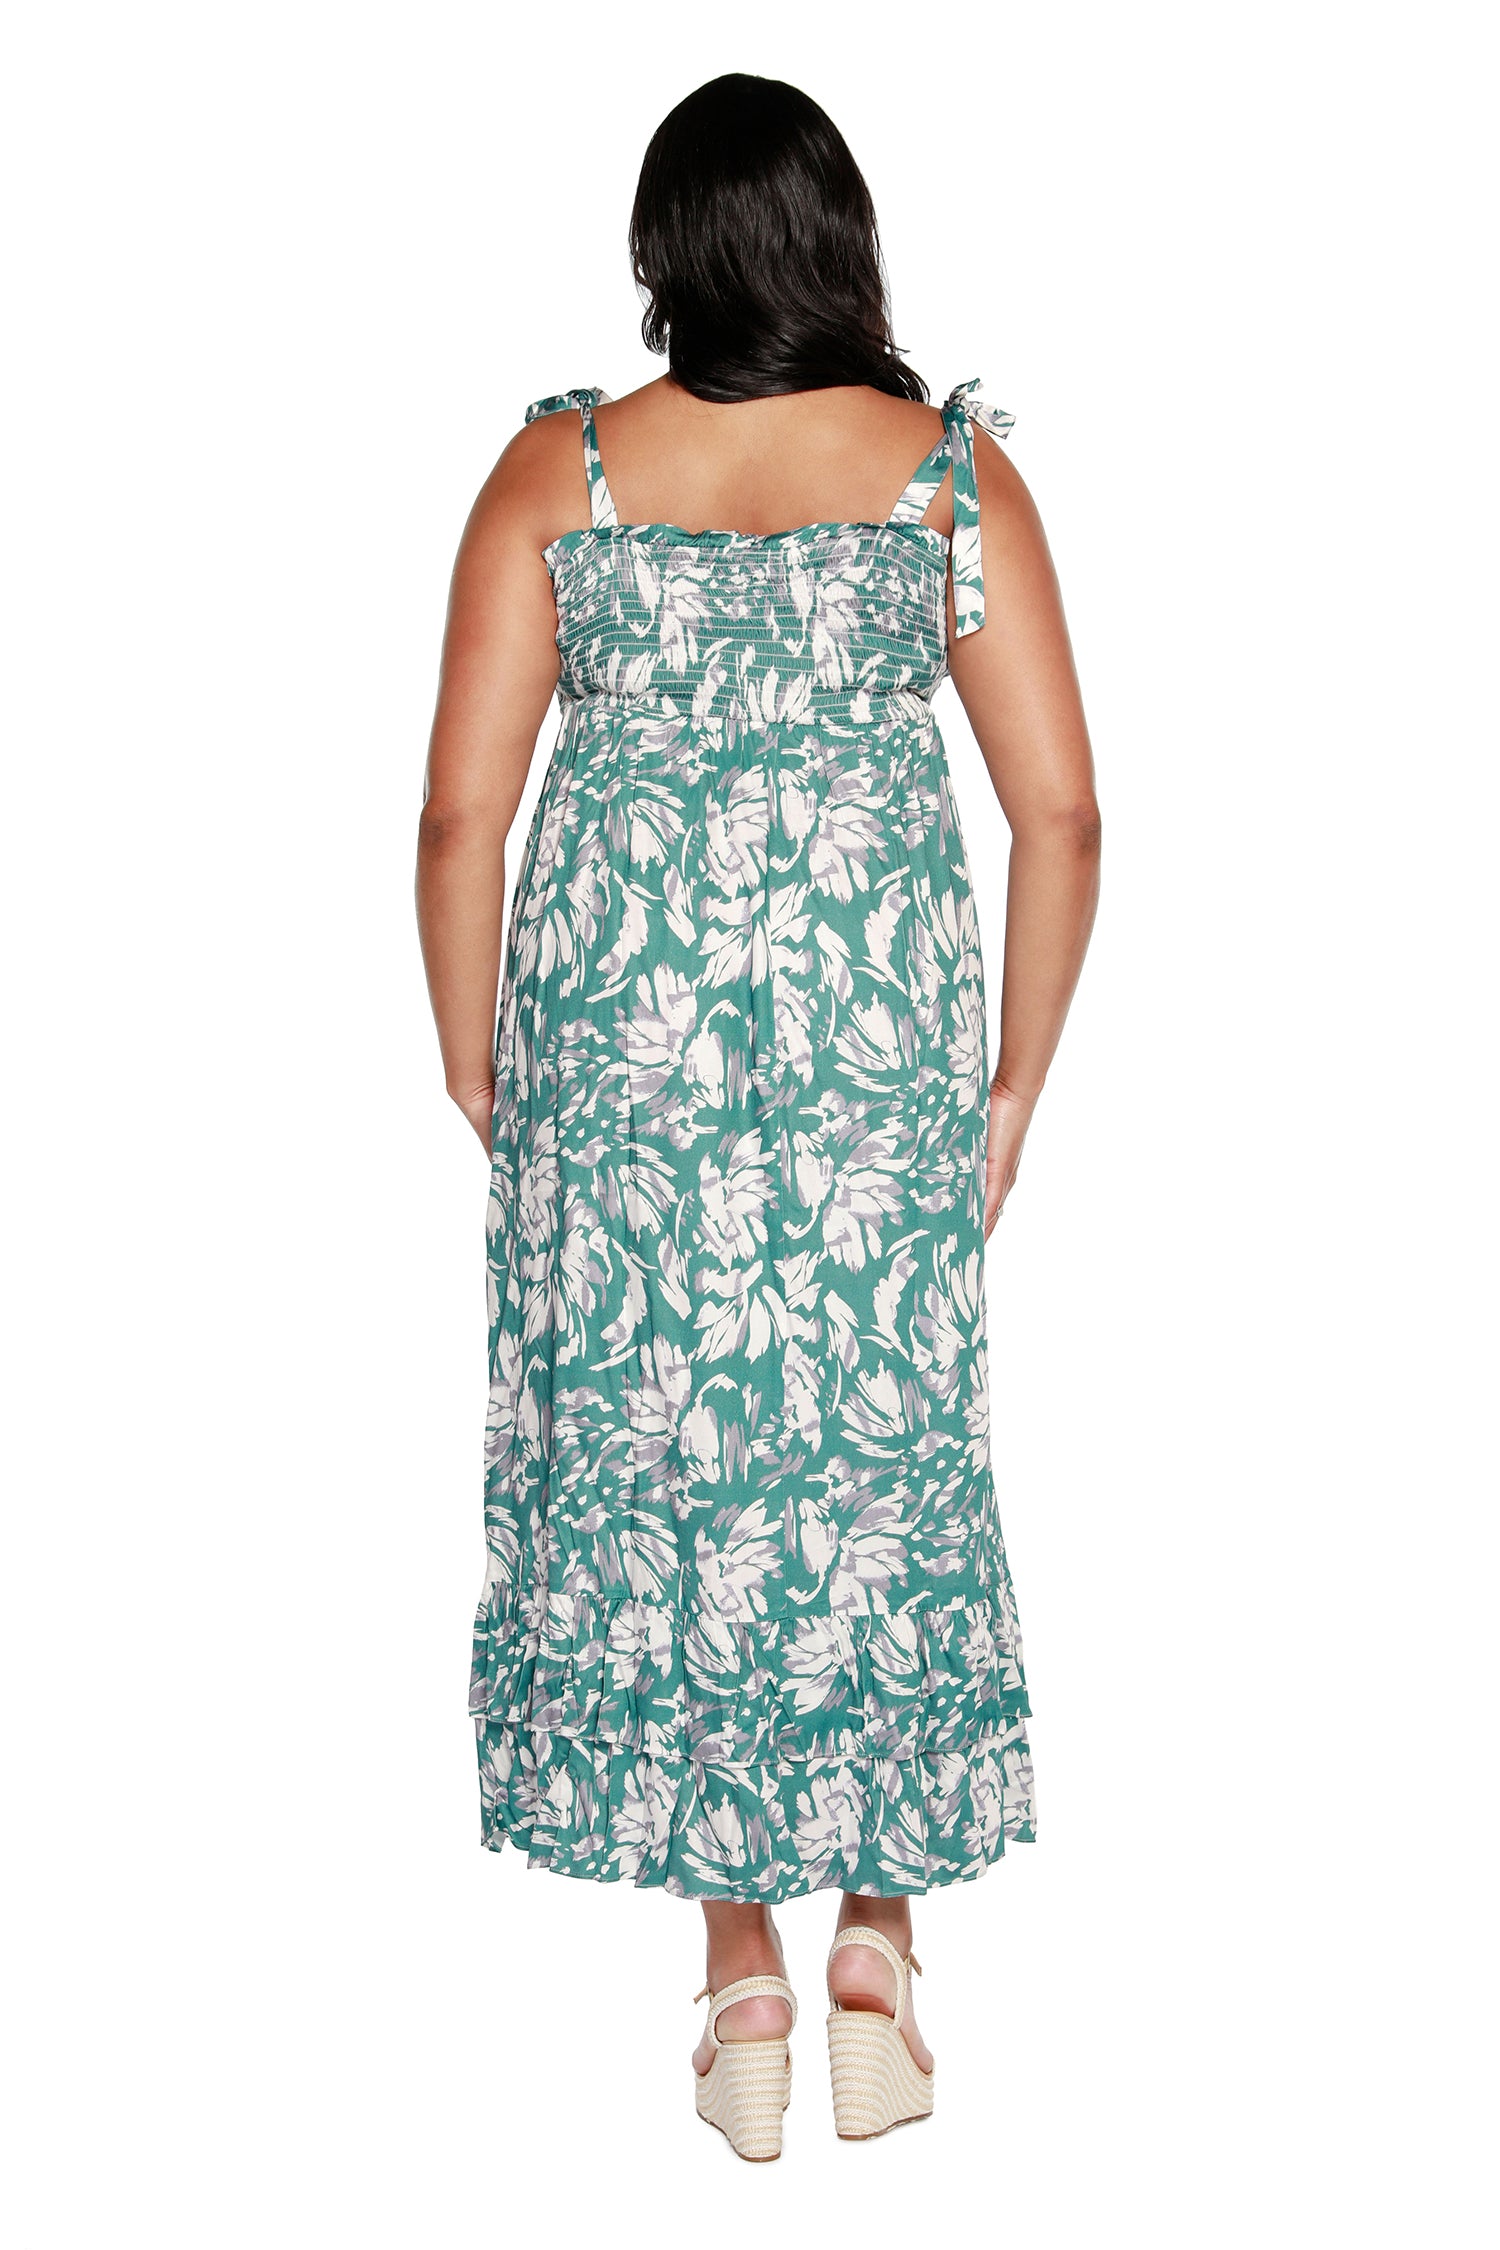 Women’s Floral Maxi Dress with Tie Straps and Hem Ruffles | Curvy